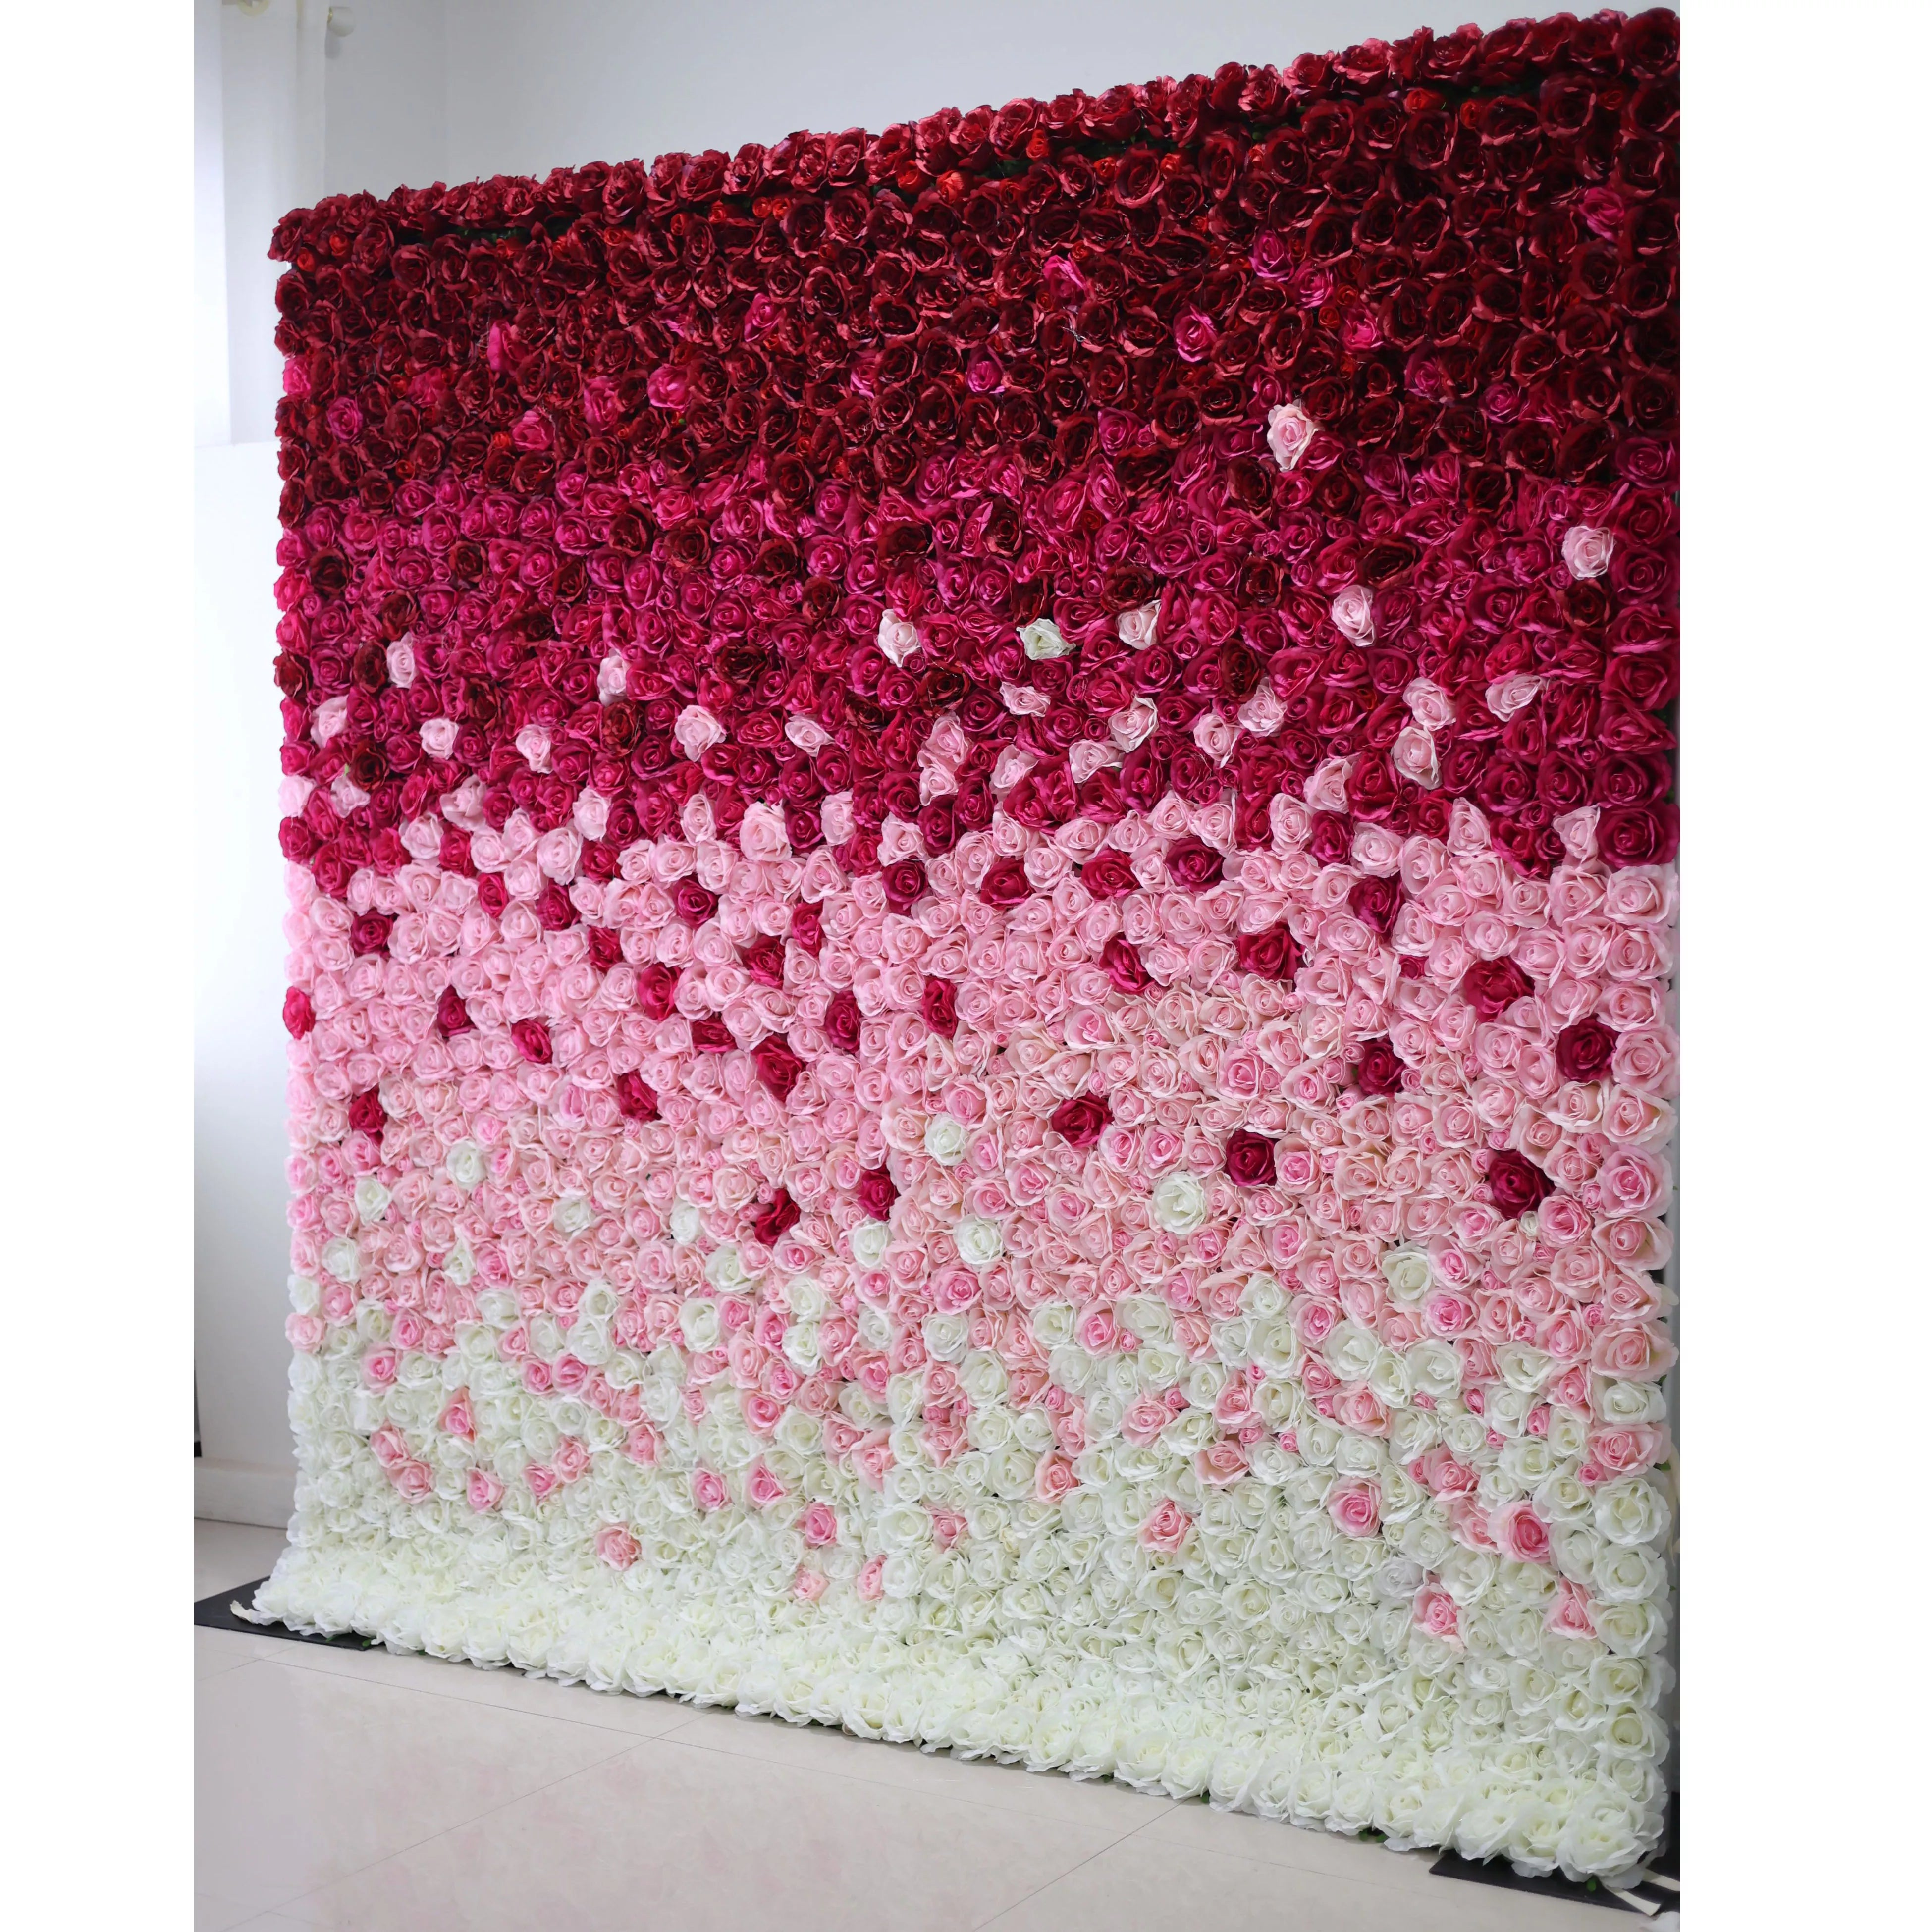 Valar Flowers fabric flower wall with artificial gradient from wine to white, ideal for wedding backdrop, floral party decor, and event photography4